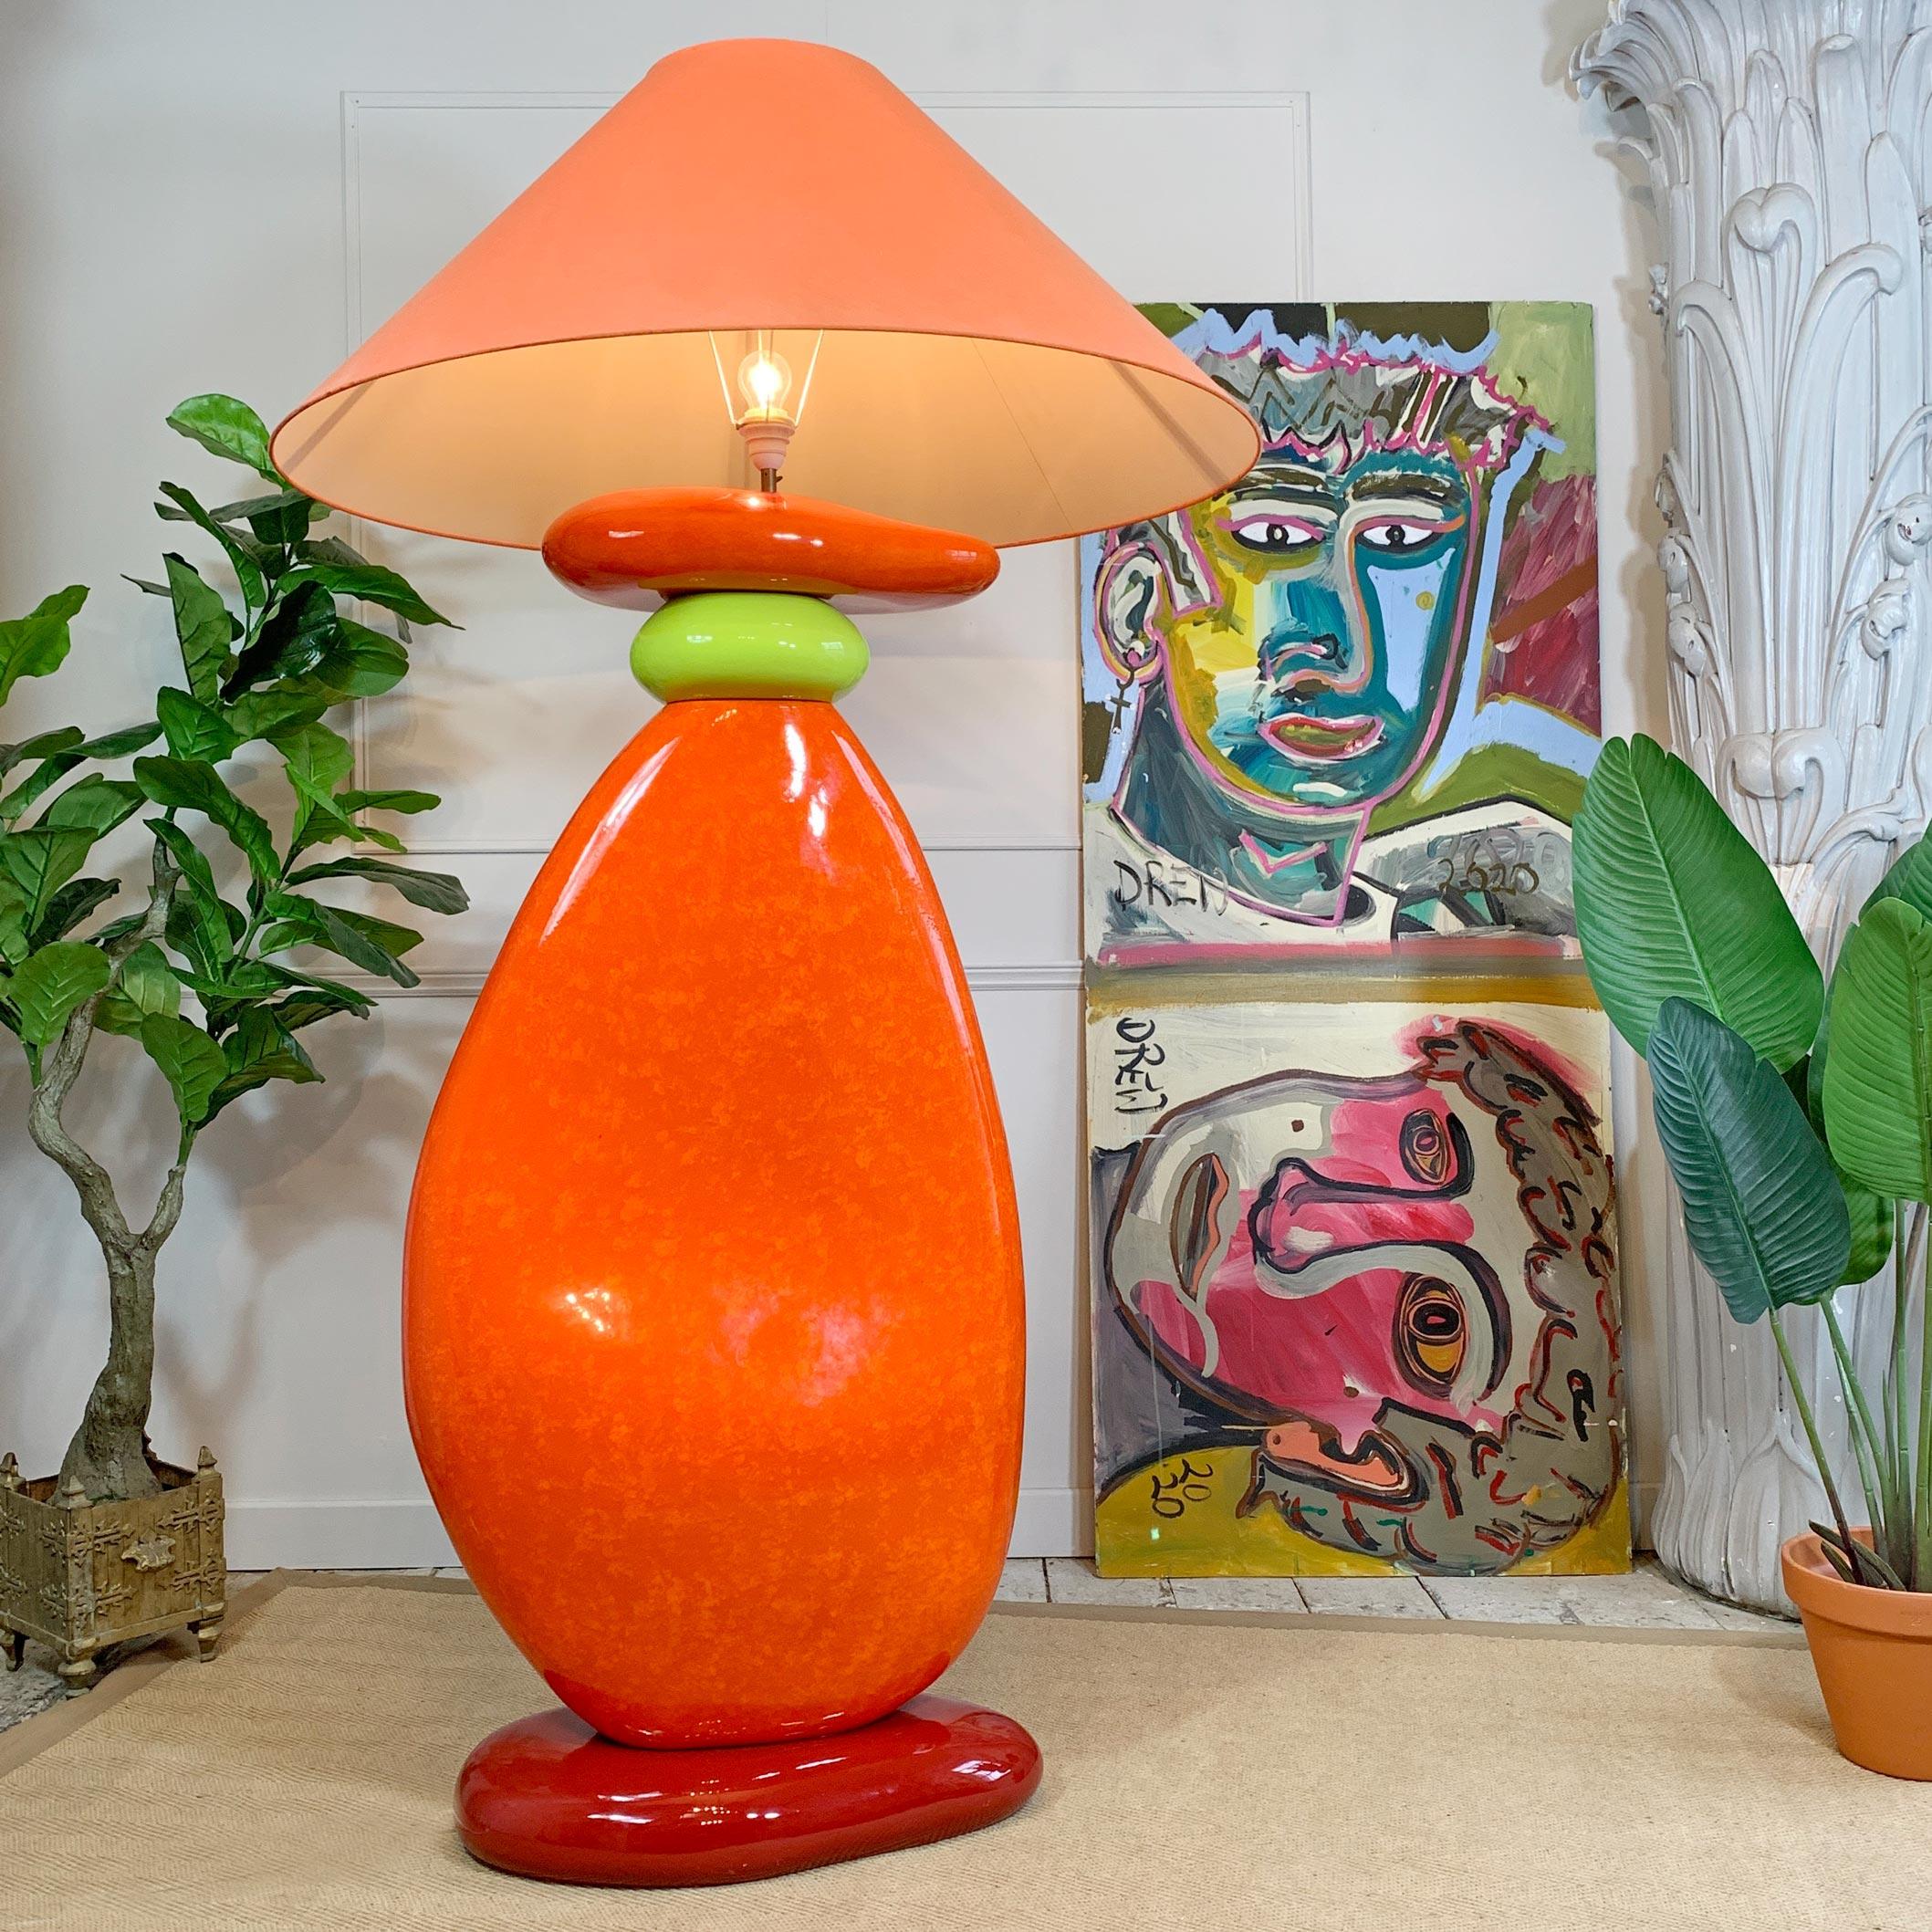 This is a spectacular floor lamp, designed by Francois Châtain, France, in the 1980s. The design replicates huge shaped pebbles balancing on top of each other, in bright primary colours of Orange, Red, and Lime Green. 

The lamp shade alone is 1